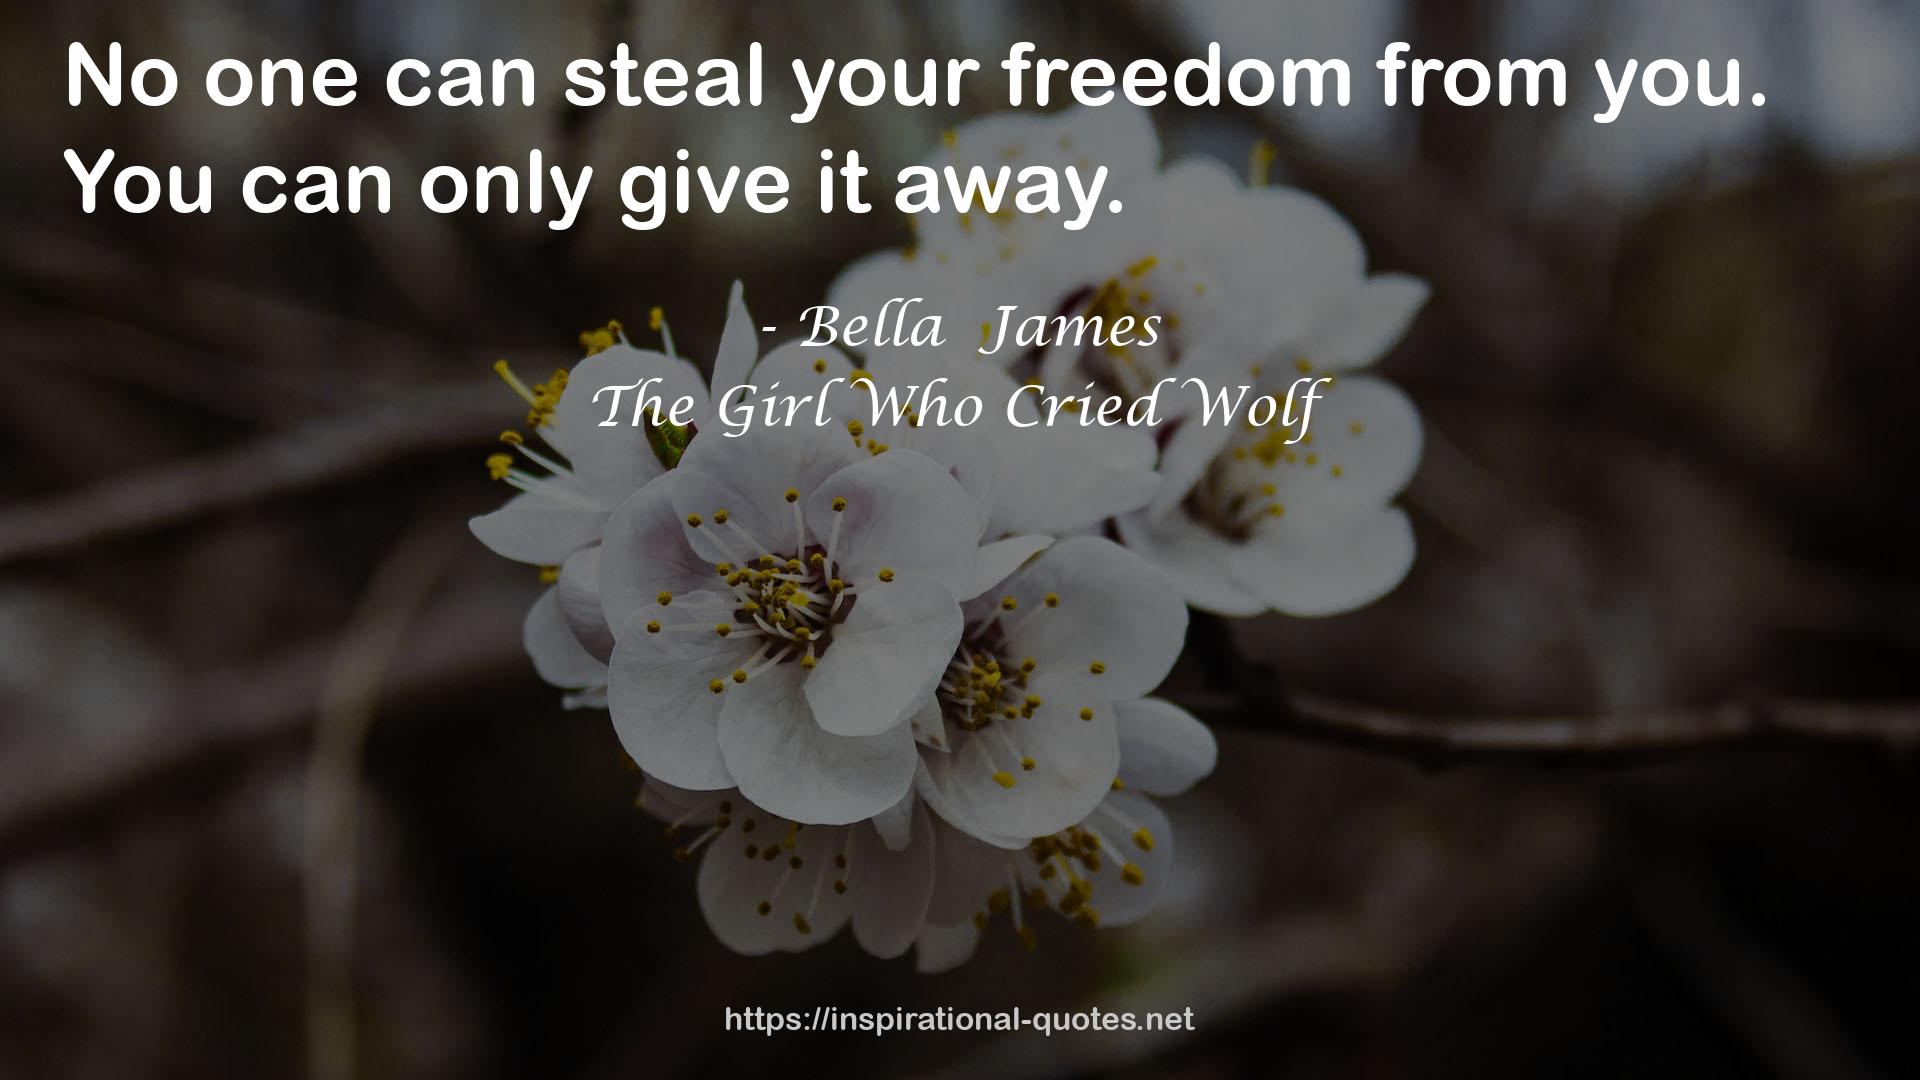 The Girl Who Cried Wolf QUOTES